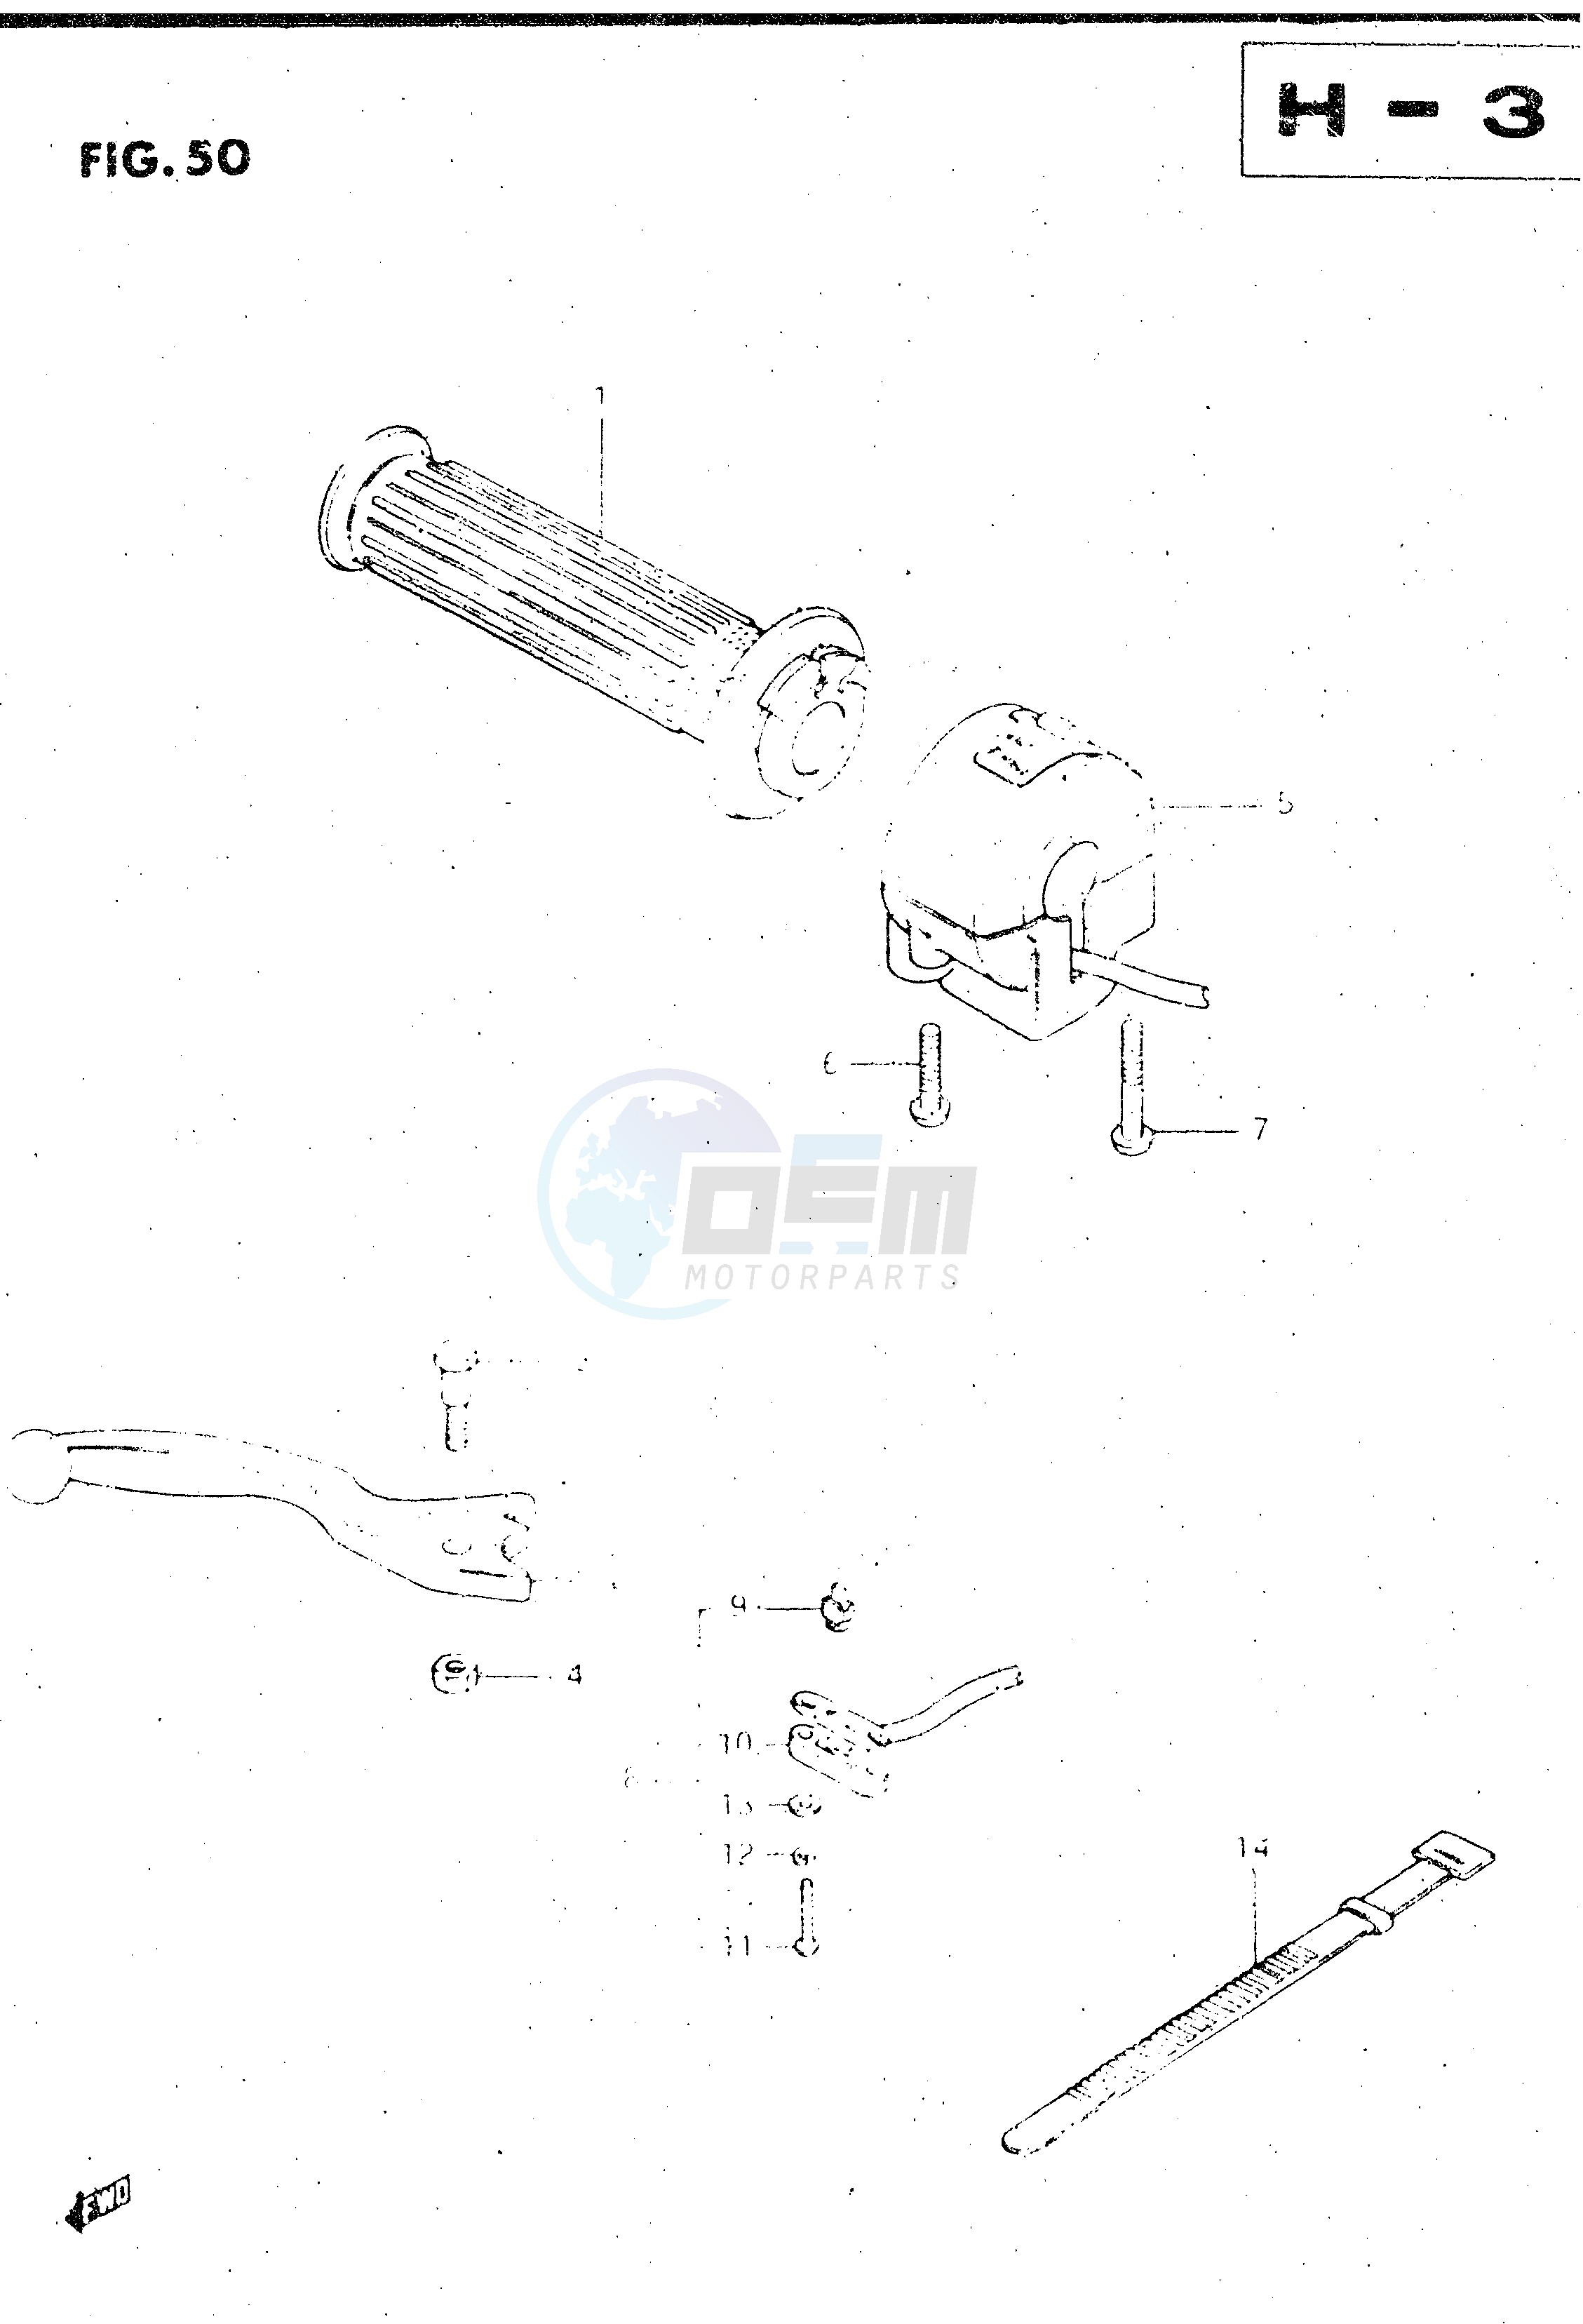 RIGHT HANDLE SWITCH blueprint